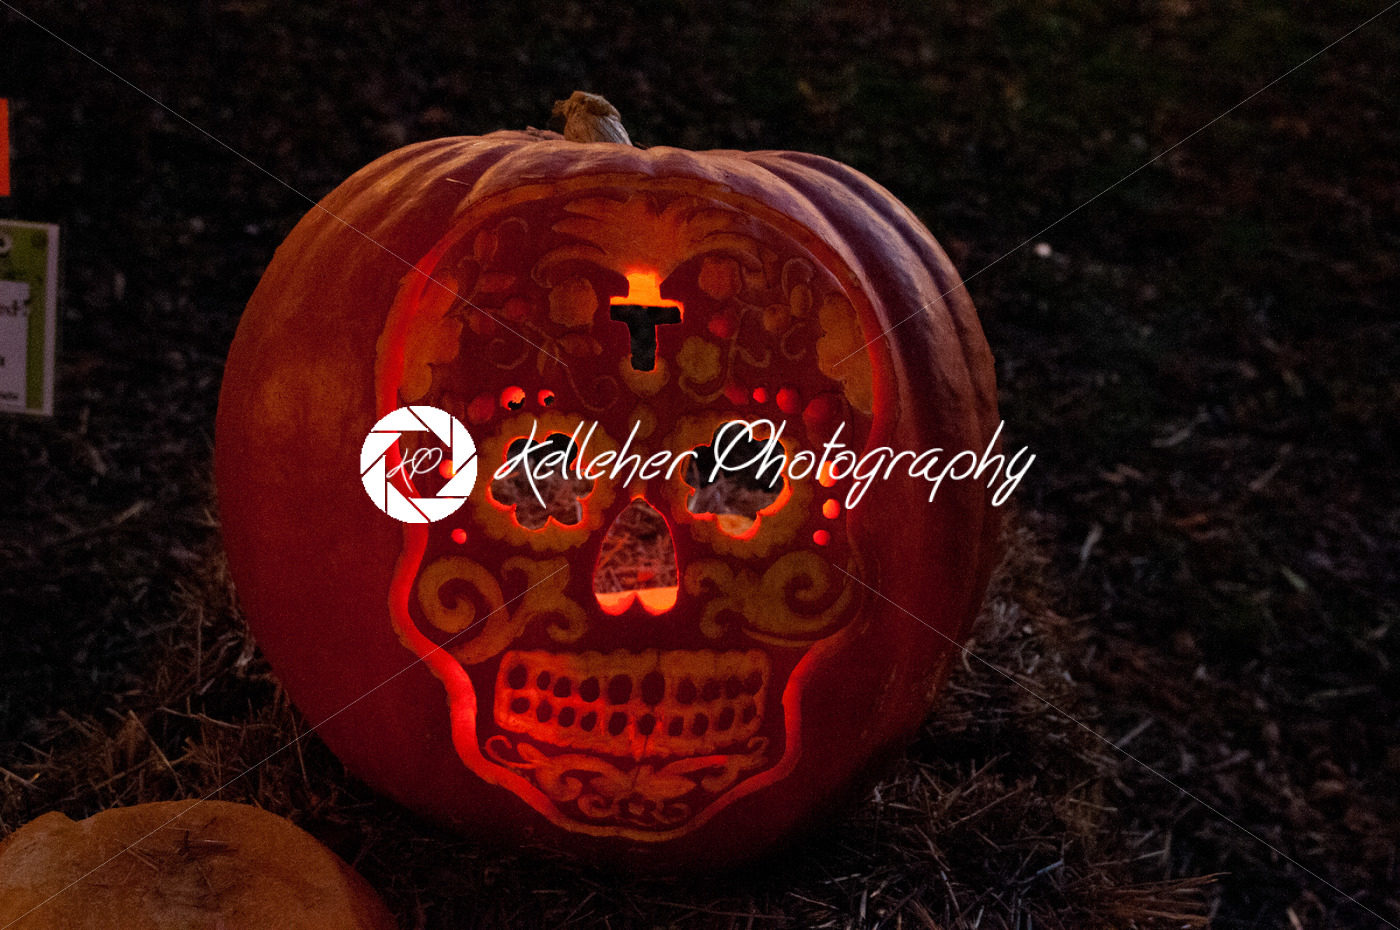 CHADDS FORD, PA – OCTOBER 26: Skull Pumpkin at The Great Pumpkin Carve carving contest on October 26, 2013 - Kelleher Photography Store